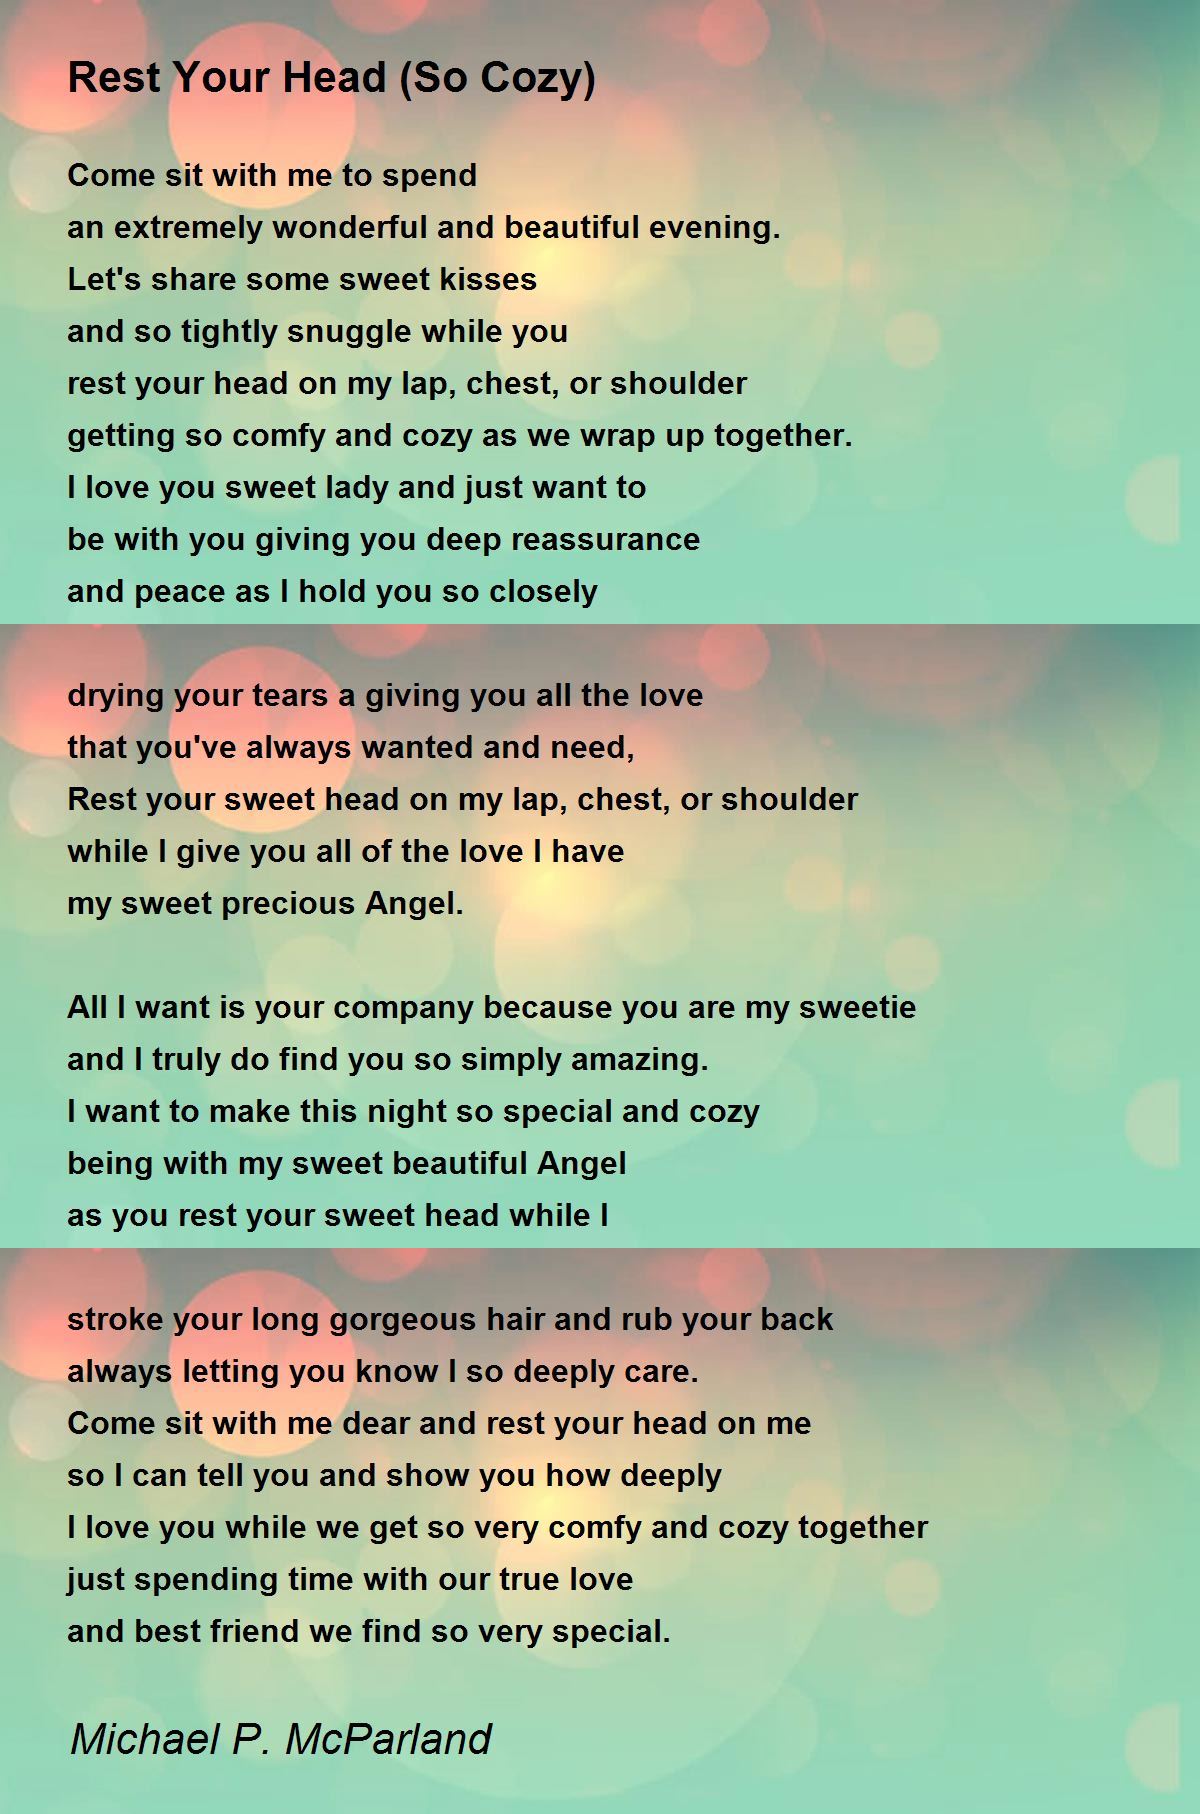 Rest Your Head (So Cozy) - Rest Your Head (So Cozy) Poem by